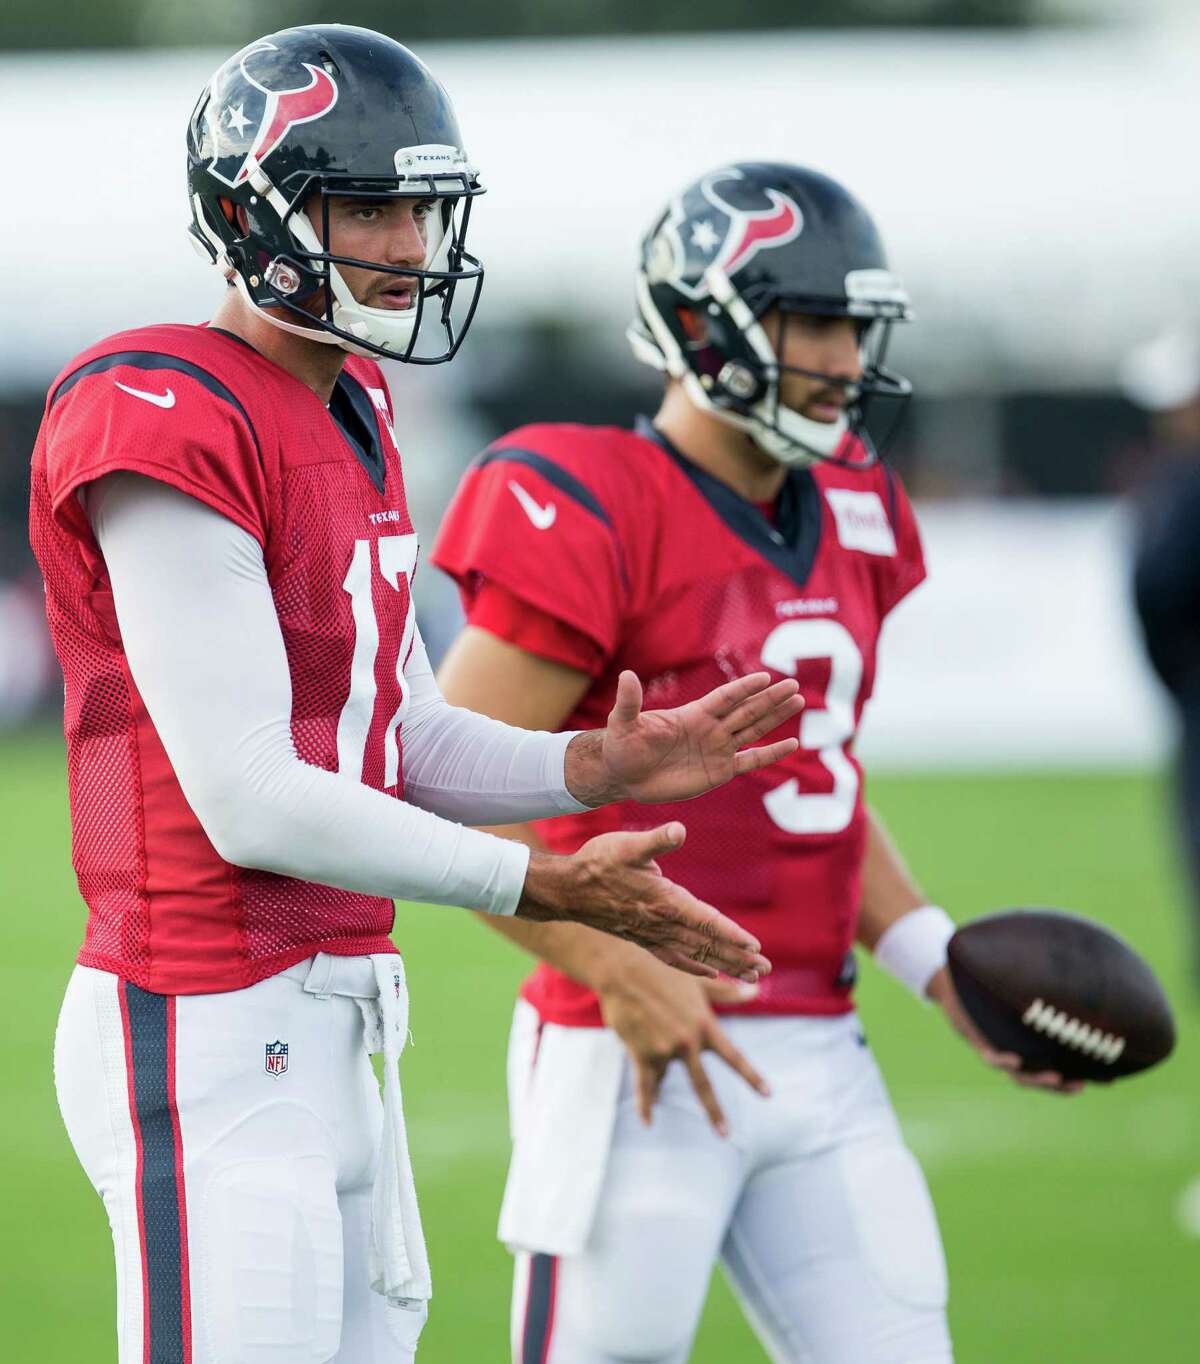 Houston Texans quarterbacks Brock Osweiler (17) and Tom Savage (3) warm up during a joint training camp practice between the Texans and Saints at Houston Methodist Training Center on Thursday, Aug. 18, 2016, in Houston.